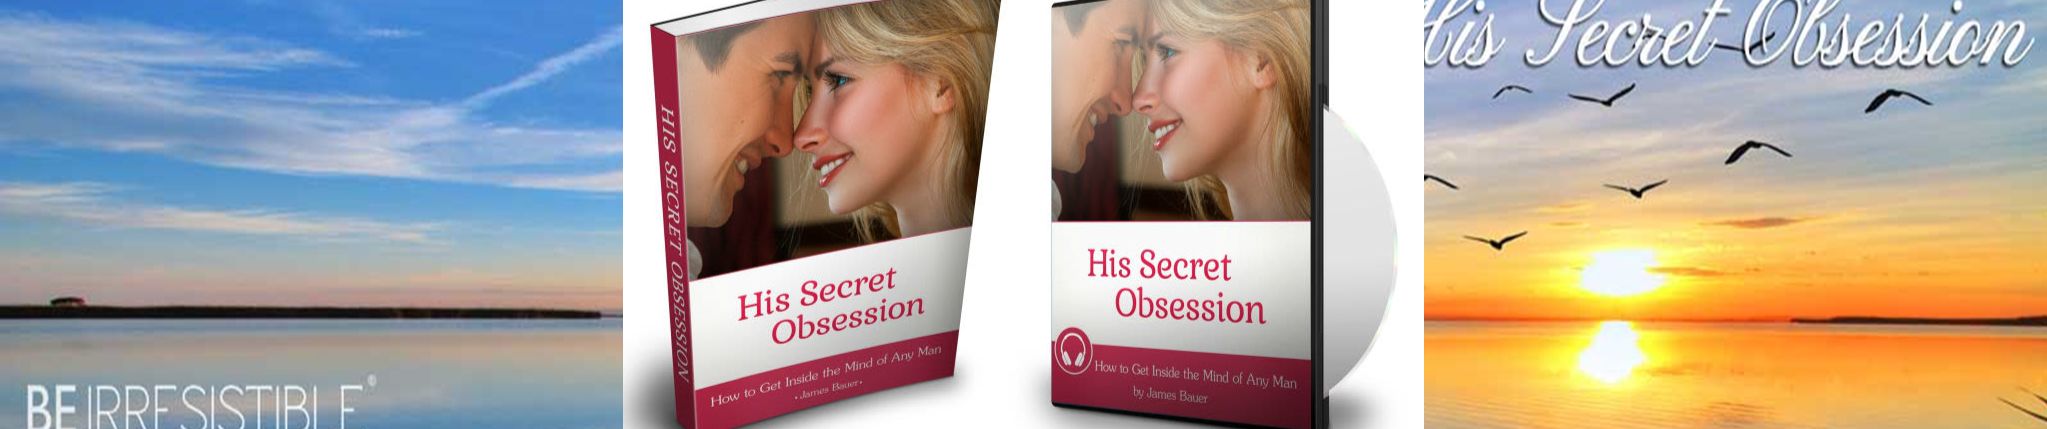 His Secret Obsession Review Abuse - How Not To Do It